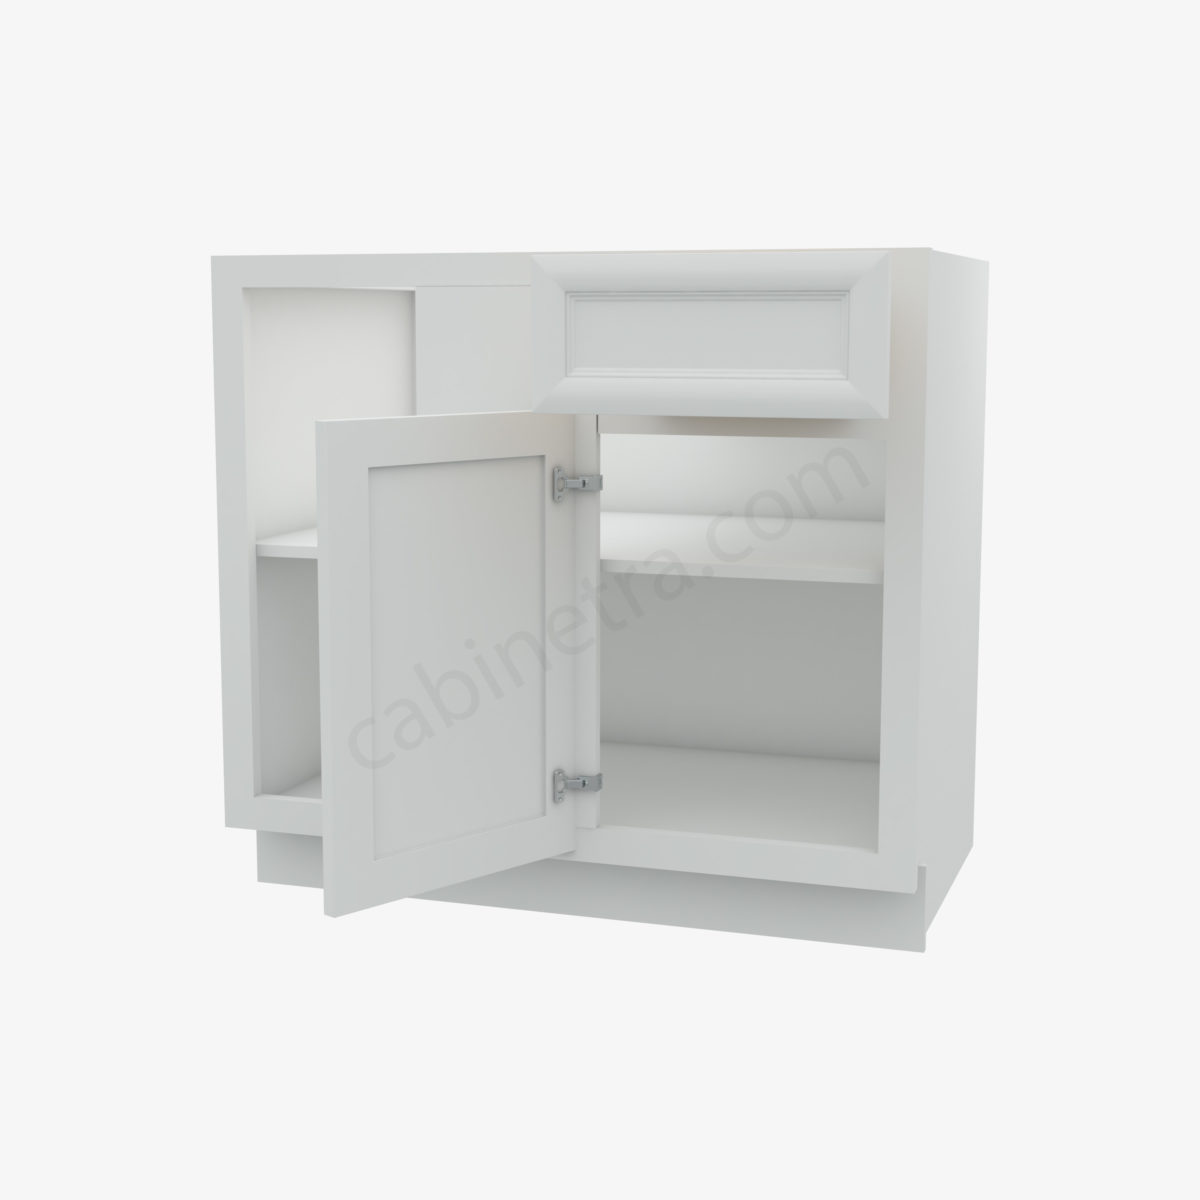 KW BBLC39 42 36W 5  Forevermark K White Cabinetra scaled